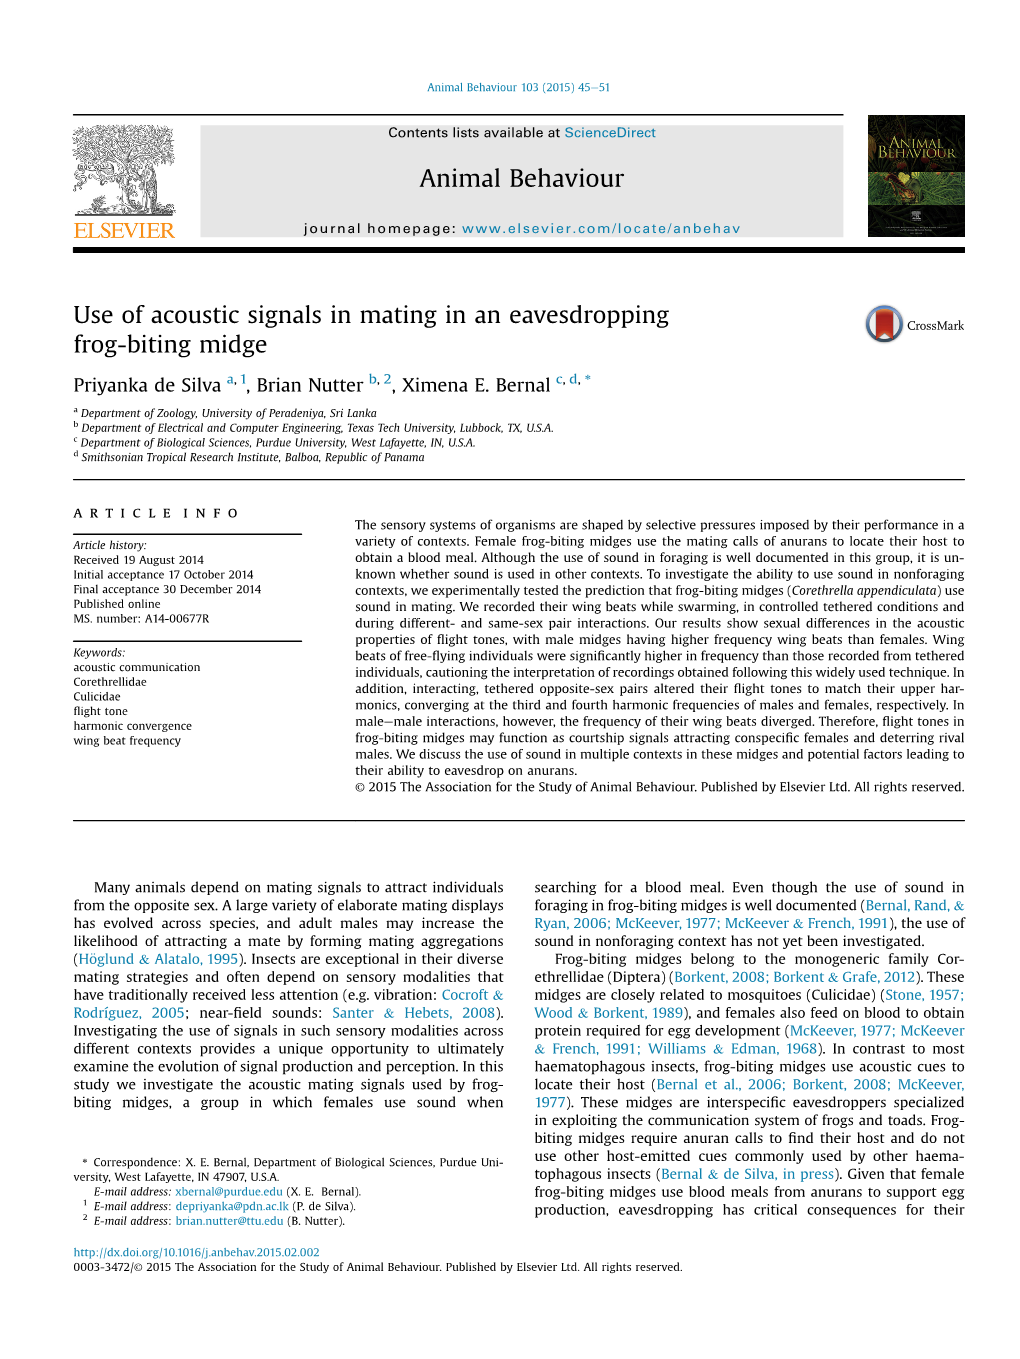 Use of Acoustic Signals in Mating in an Eavesdropping Frog-Biting Midge